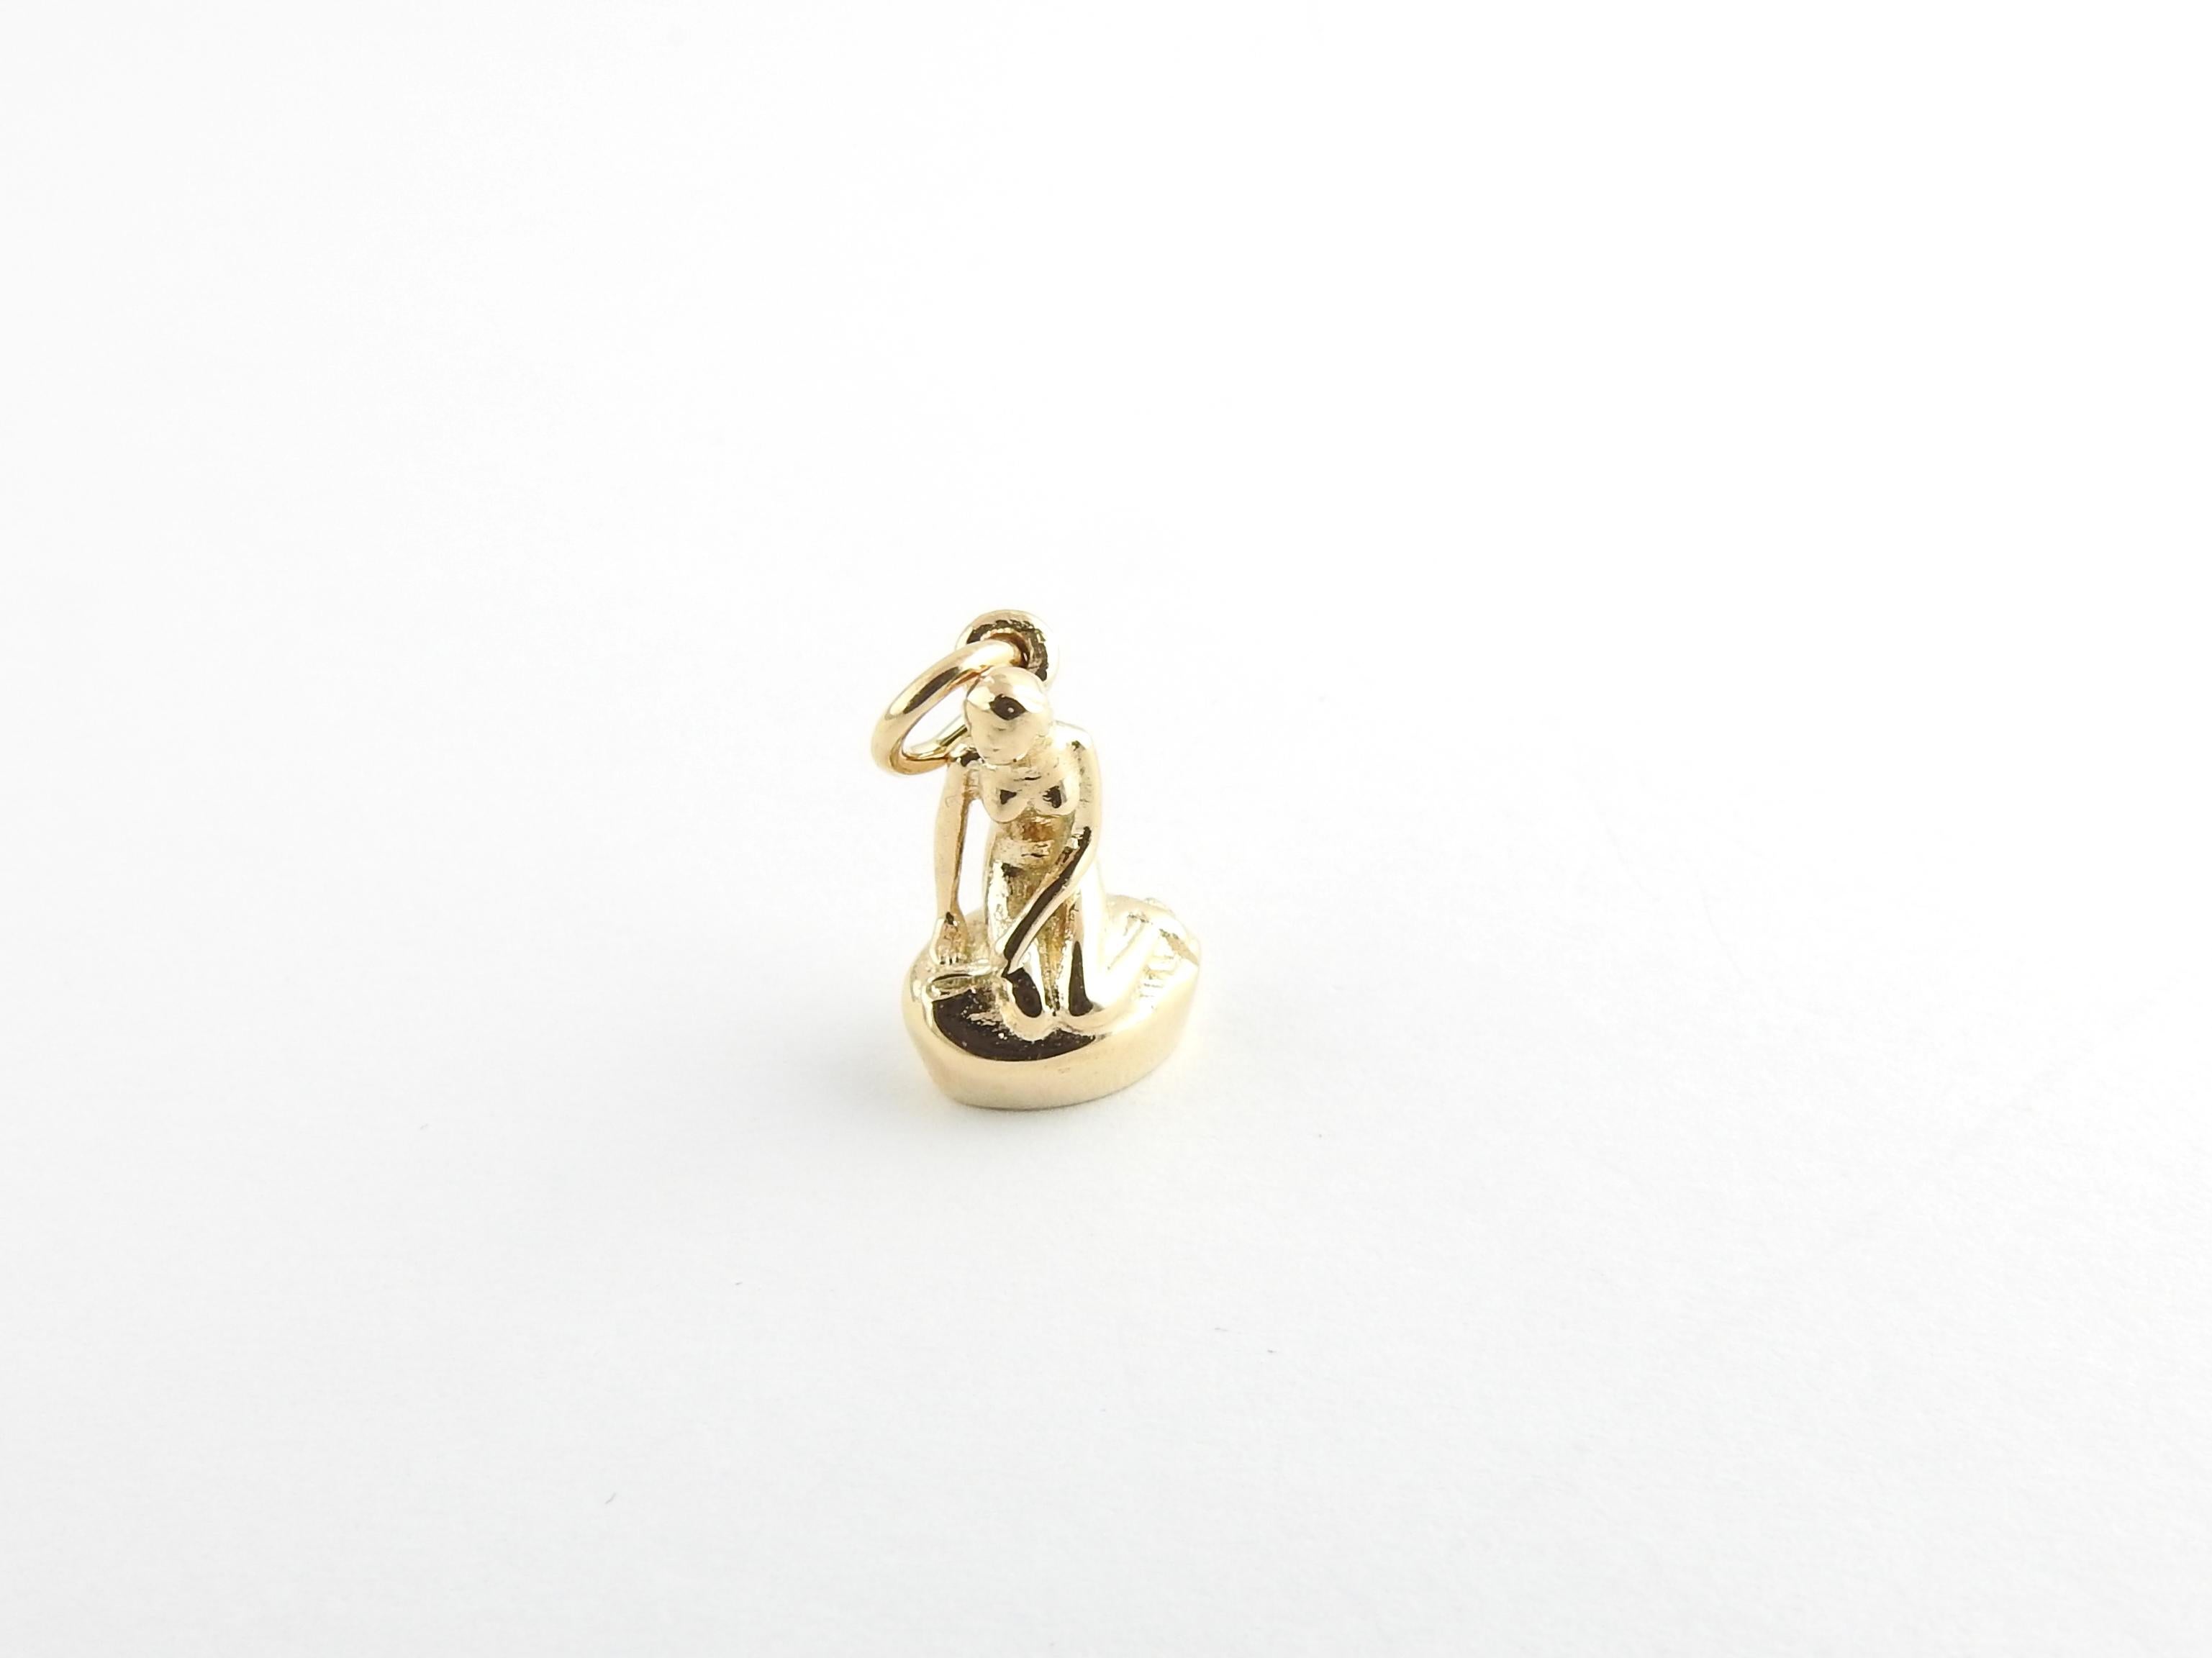 Vintage 14 Karat Yellow Gold Denmark Little Mermaid Charm

The Little Mermaid is a bronze statue in Copenhagen, Denmark that depicts a mermaid becoming human.

This lovely charm features the iconic statue crafted in beautifully detailed 14K yellow